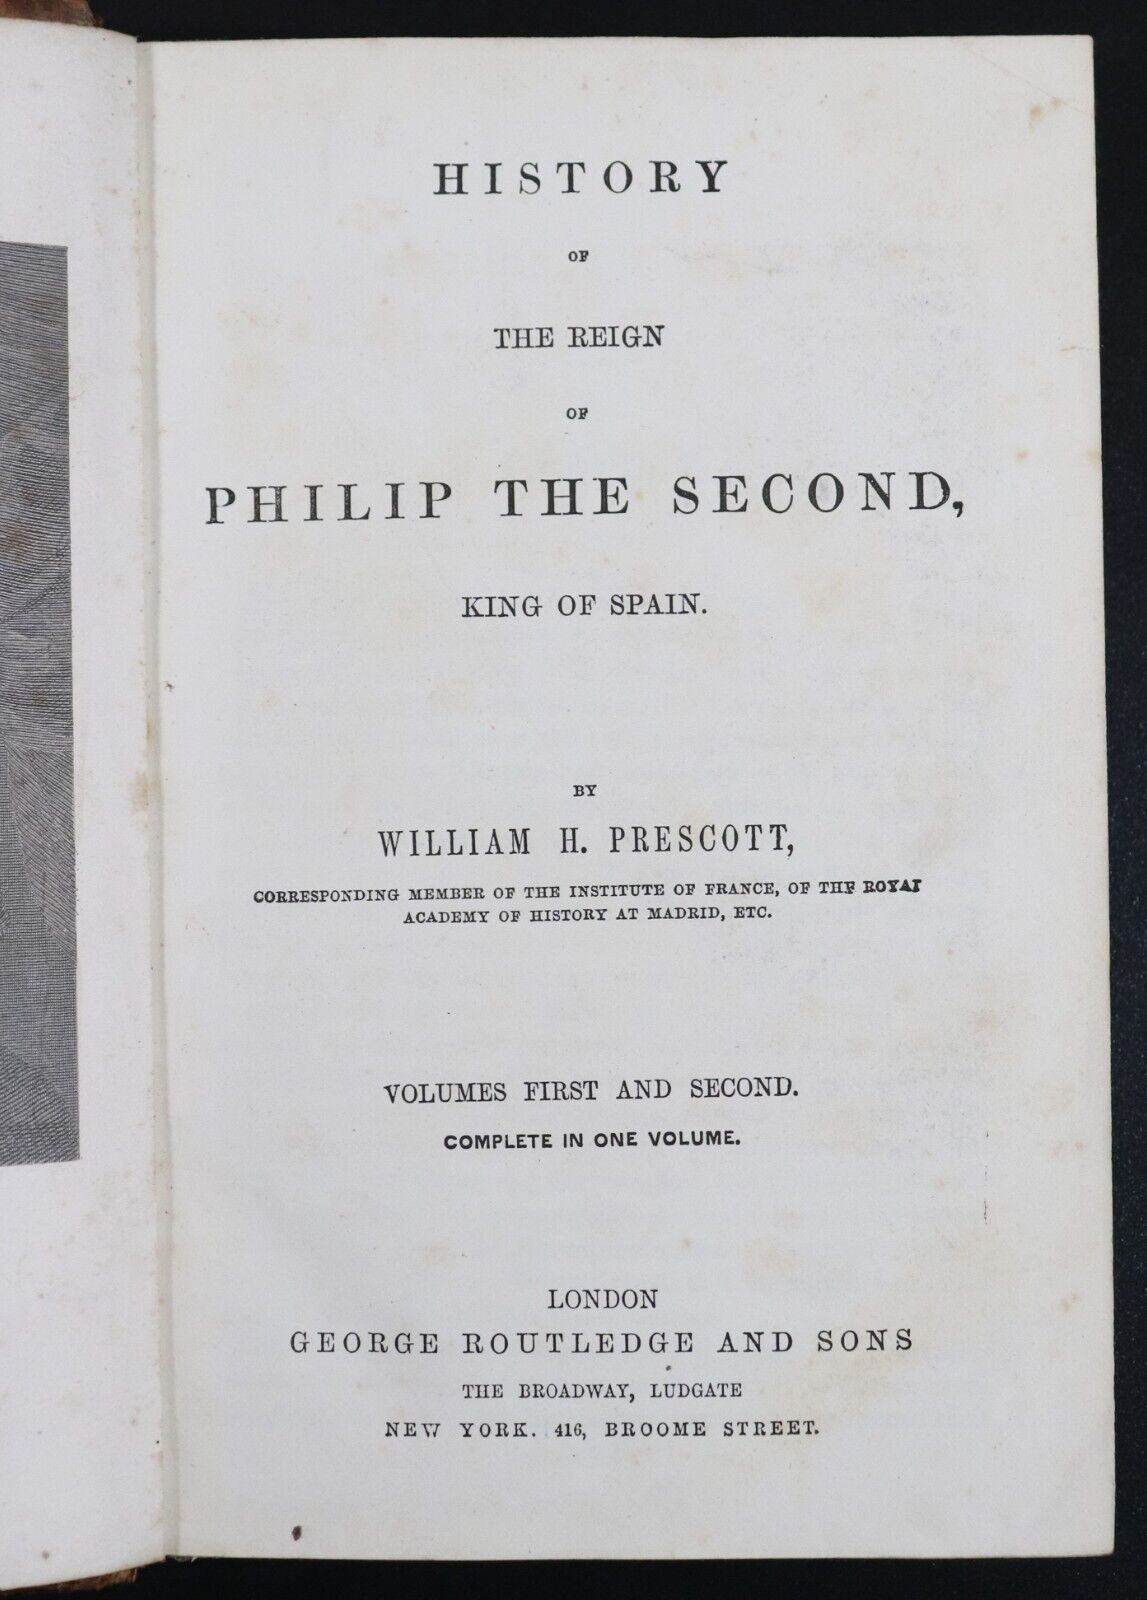 c1855 History Of The Reign Of Philip The Second Antiquarian British History Book